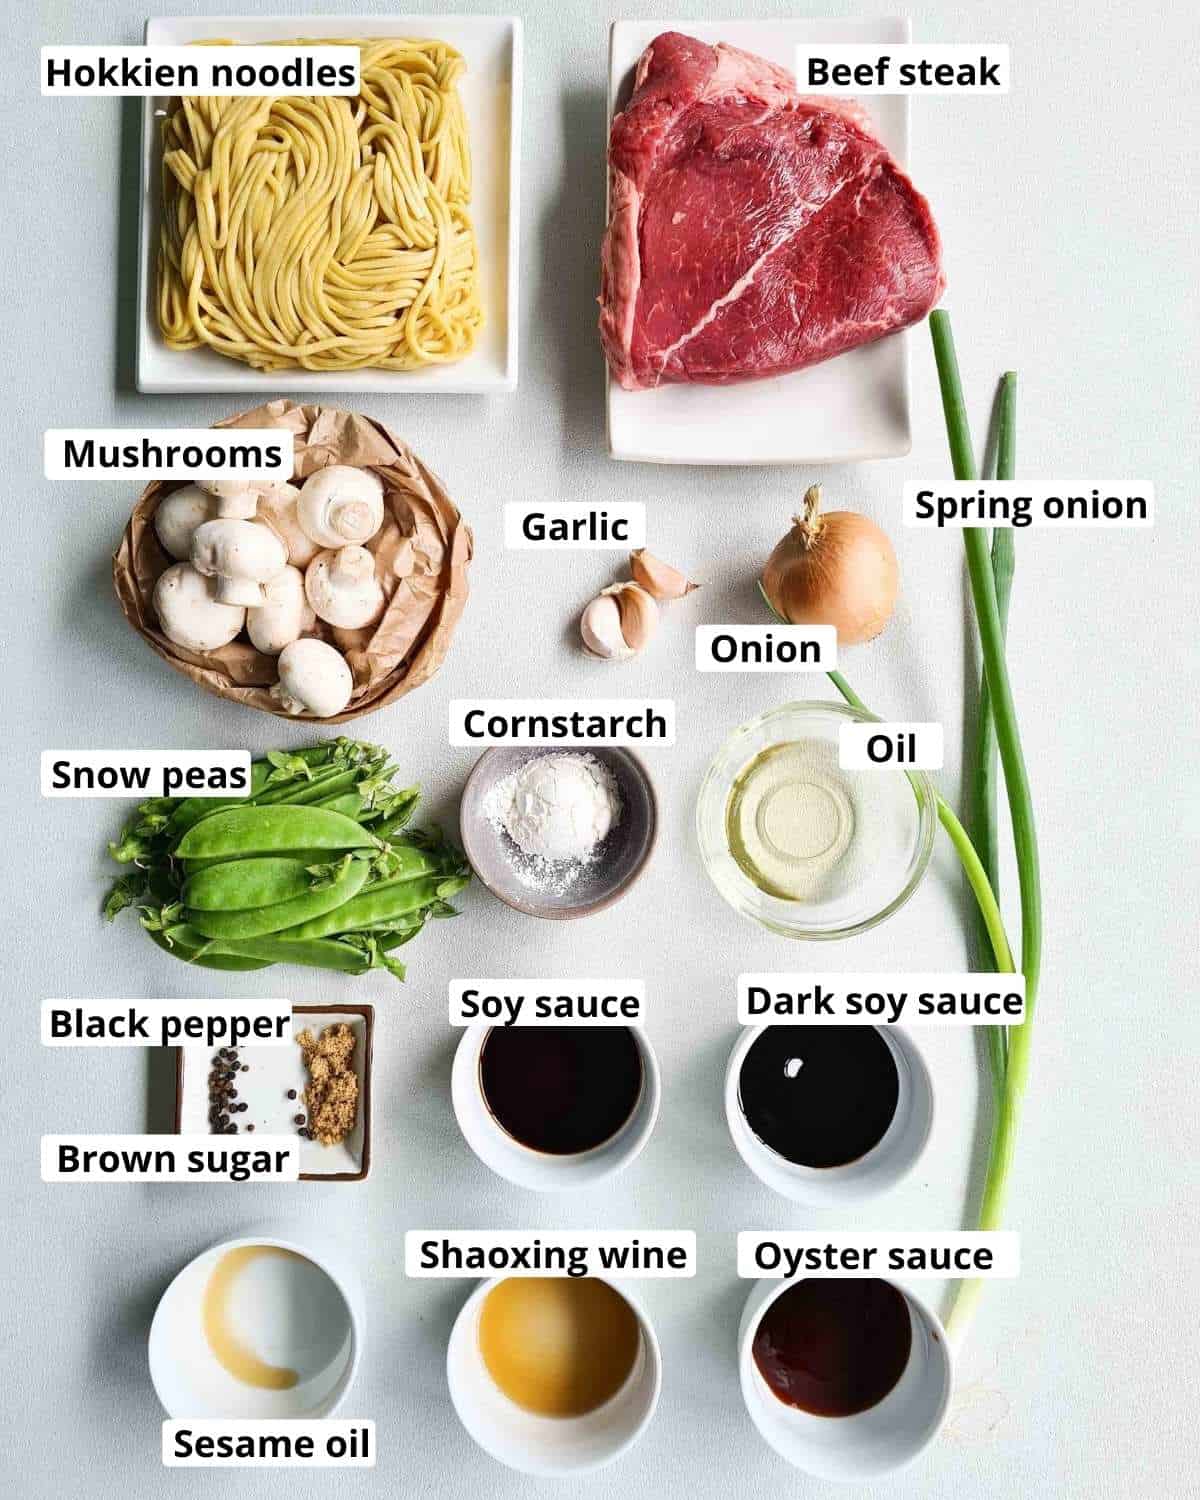 Ingredients required to make this recipe, labeled.